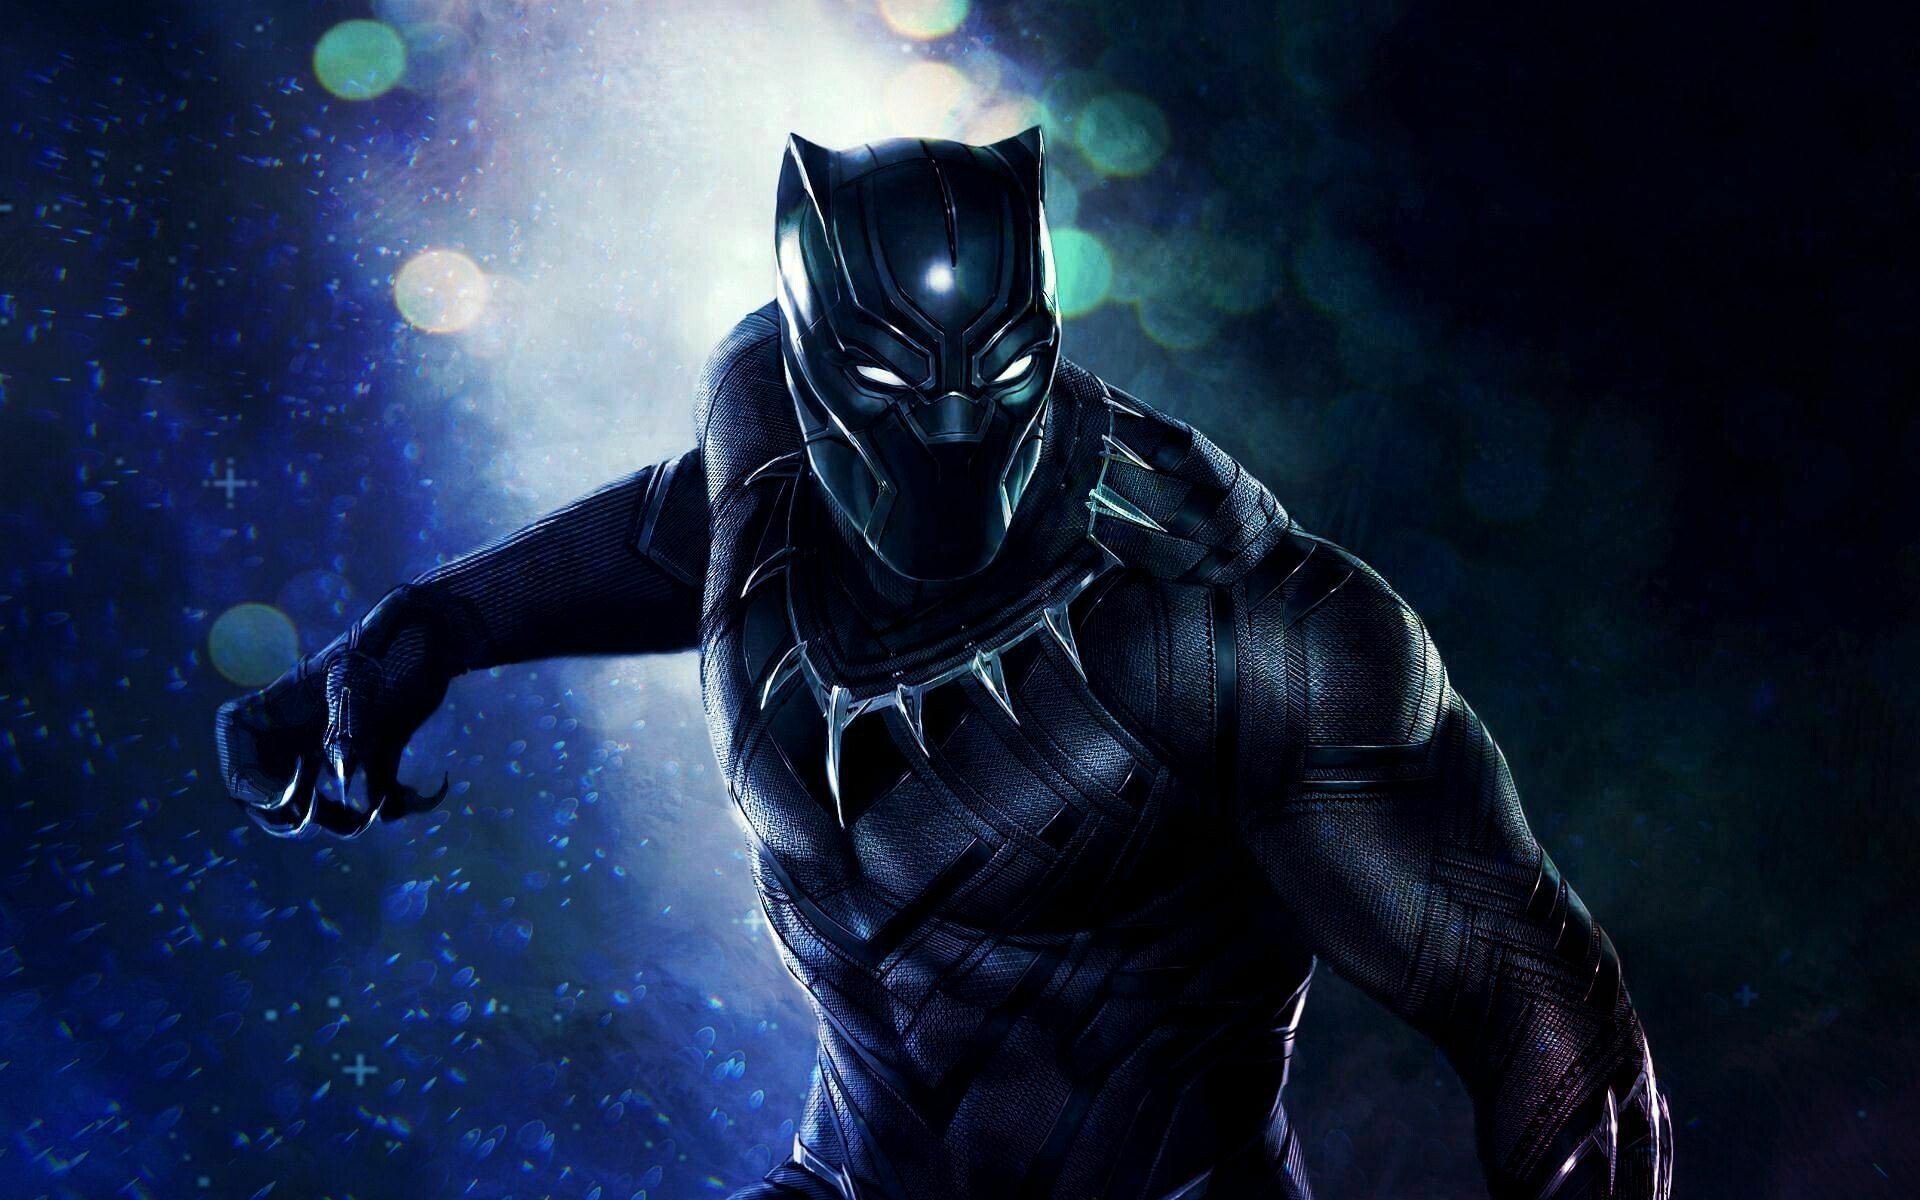 Marvel: Black Panther, The character first appeared in Fantastic Four №52. 1920x1200 HD Wallpaper.